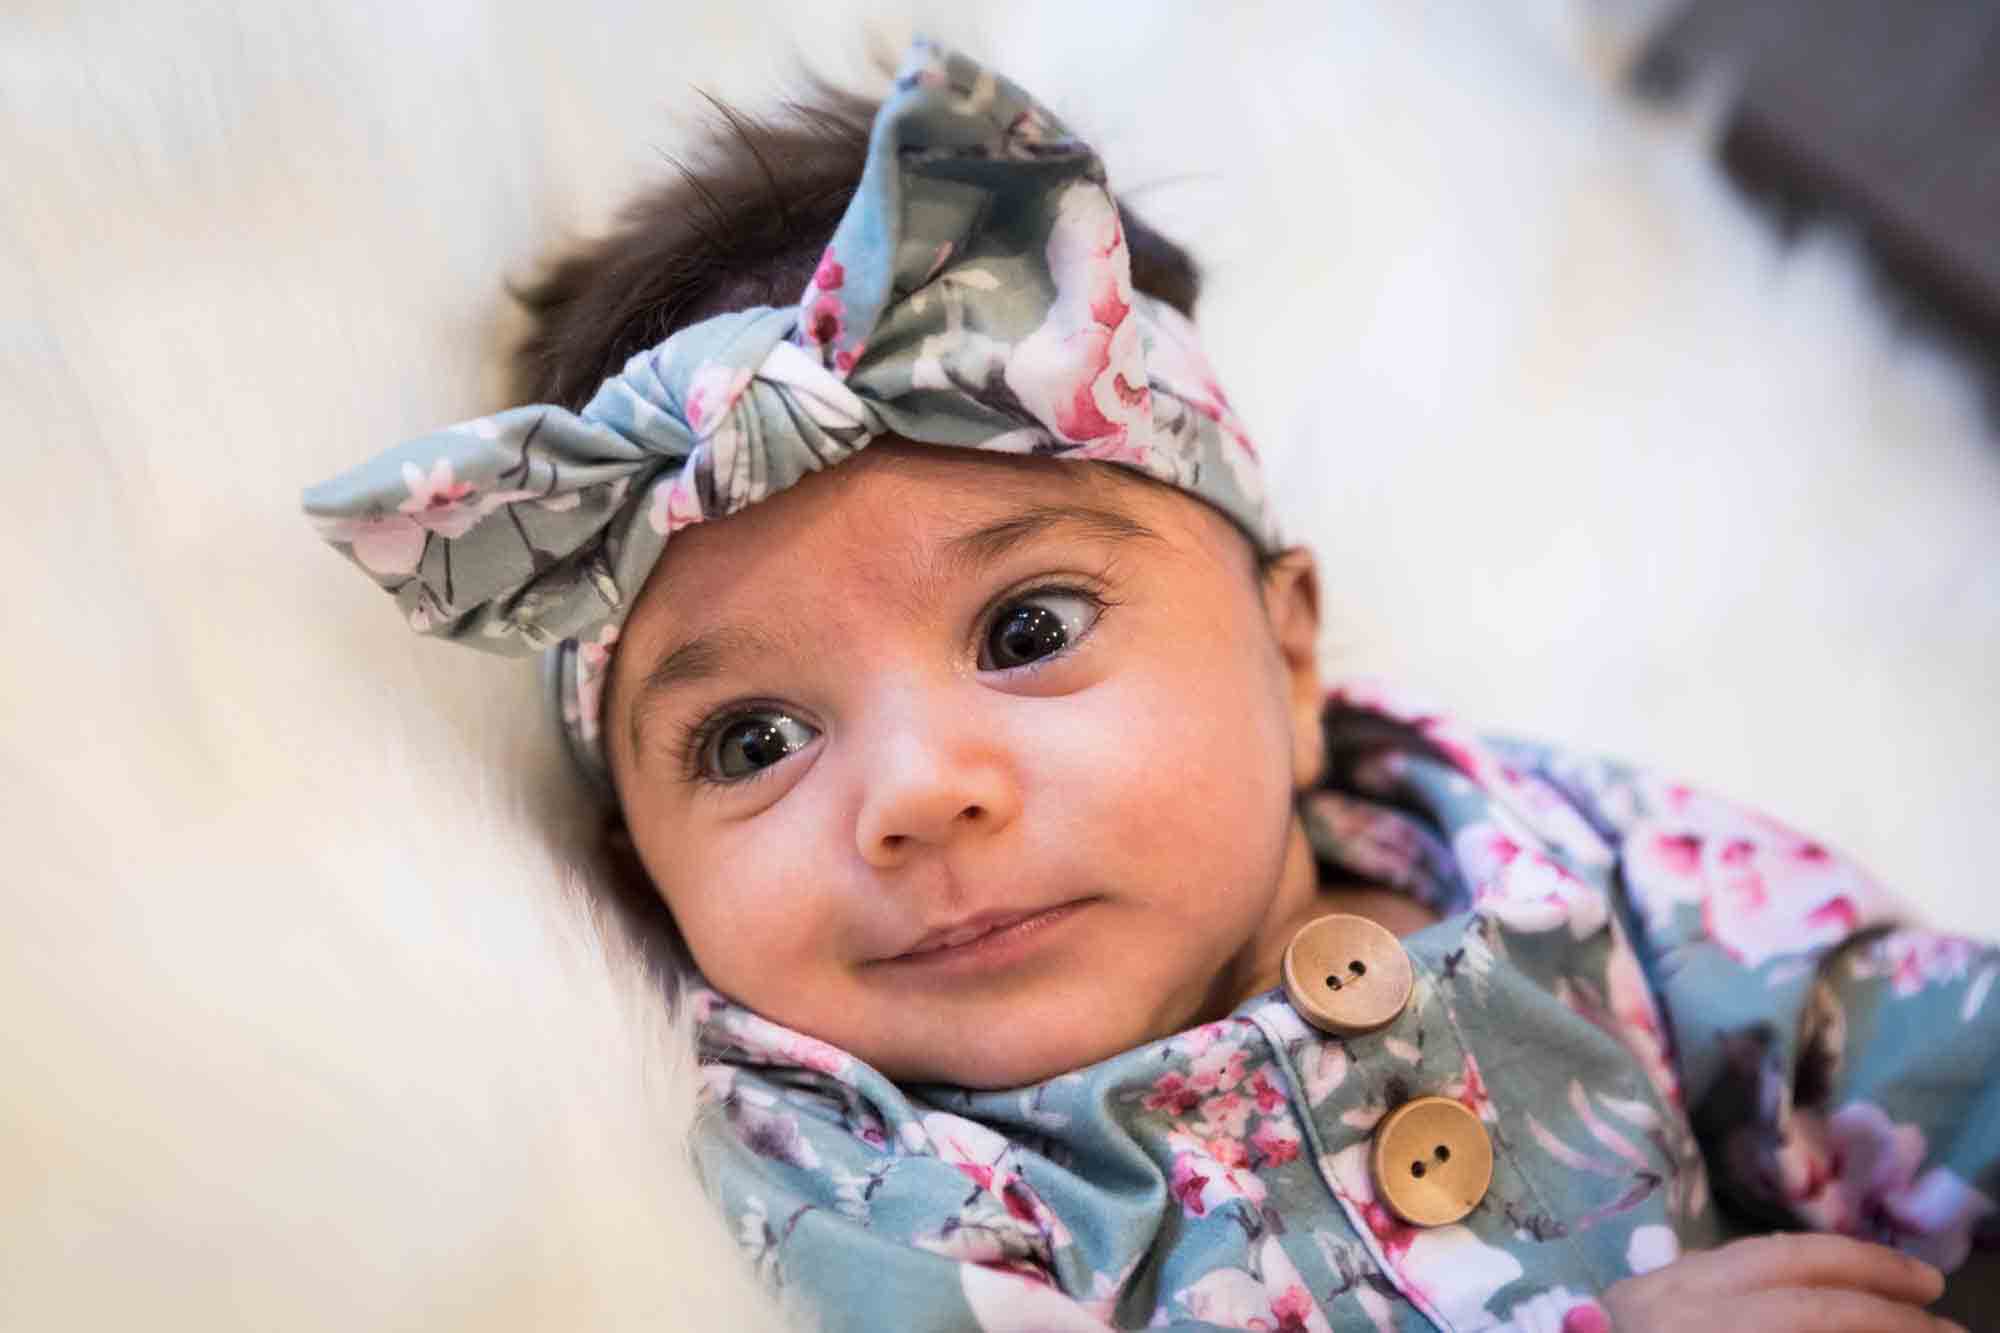 Newborn baby wearing floral dress and headband during a Christmas-themed newborn photo shoot in NYC